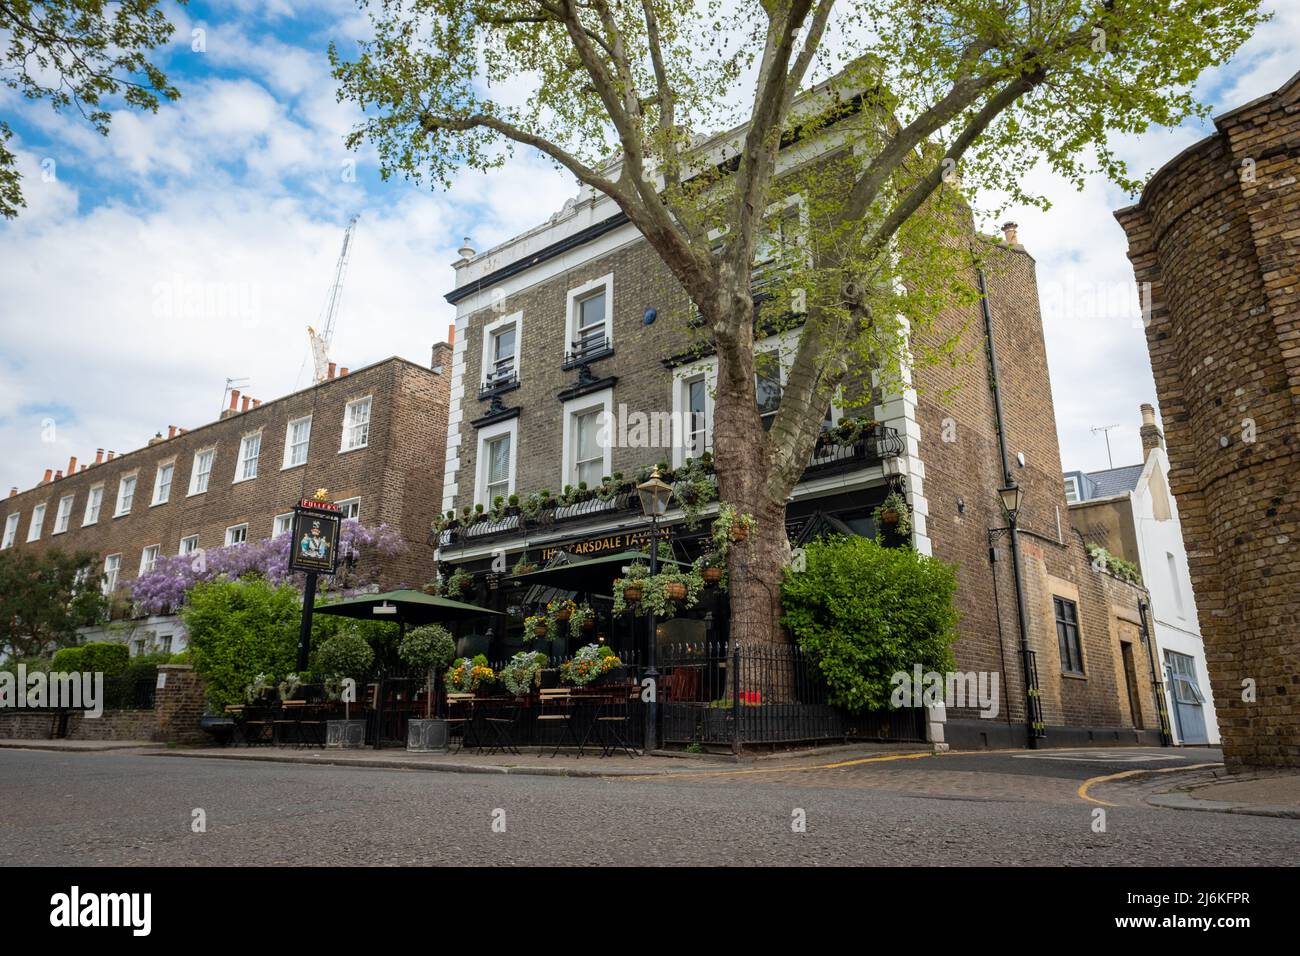 London, April 2022: The Scarsdale Tavern, an old traditional pub off High Street Kensington Stock Photo